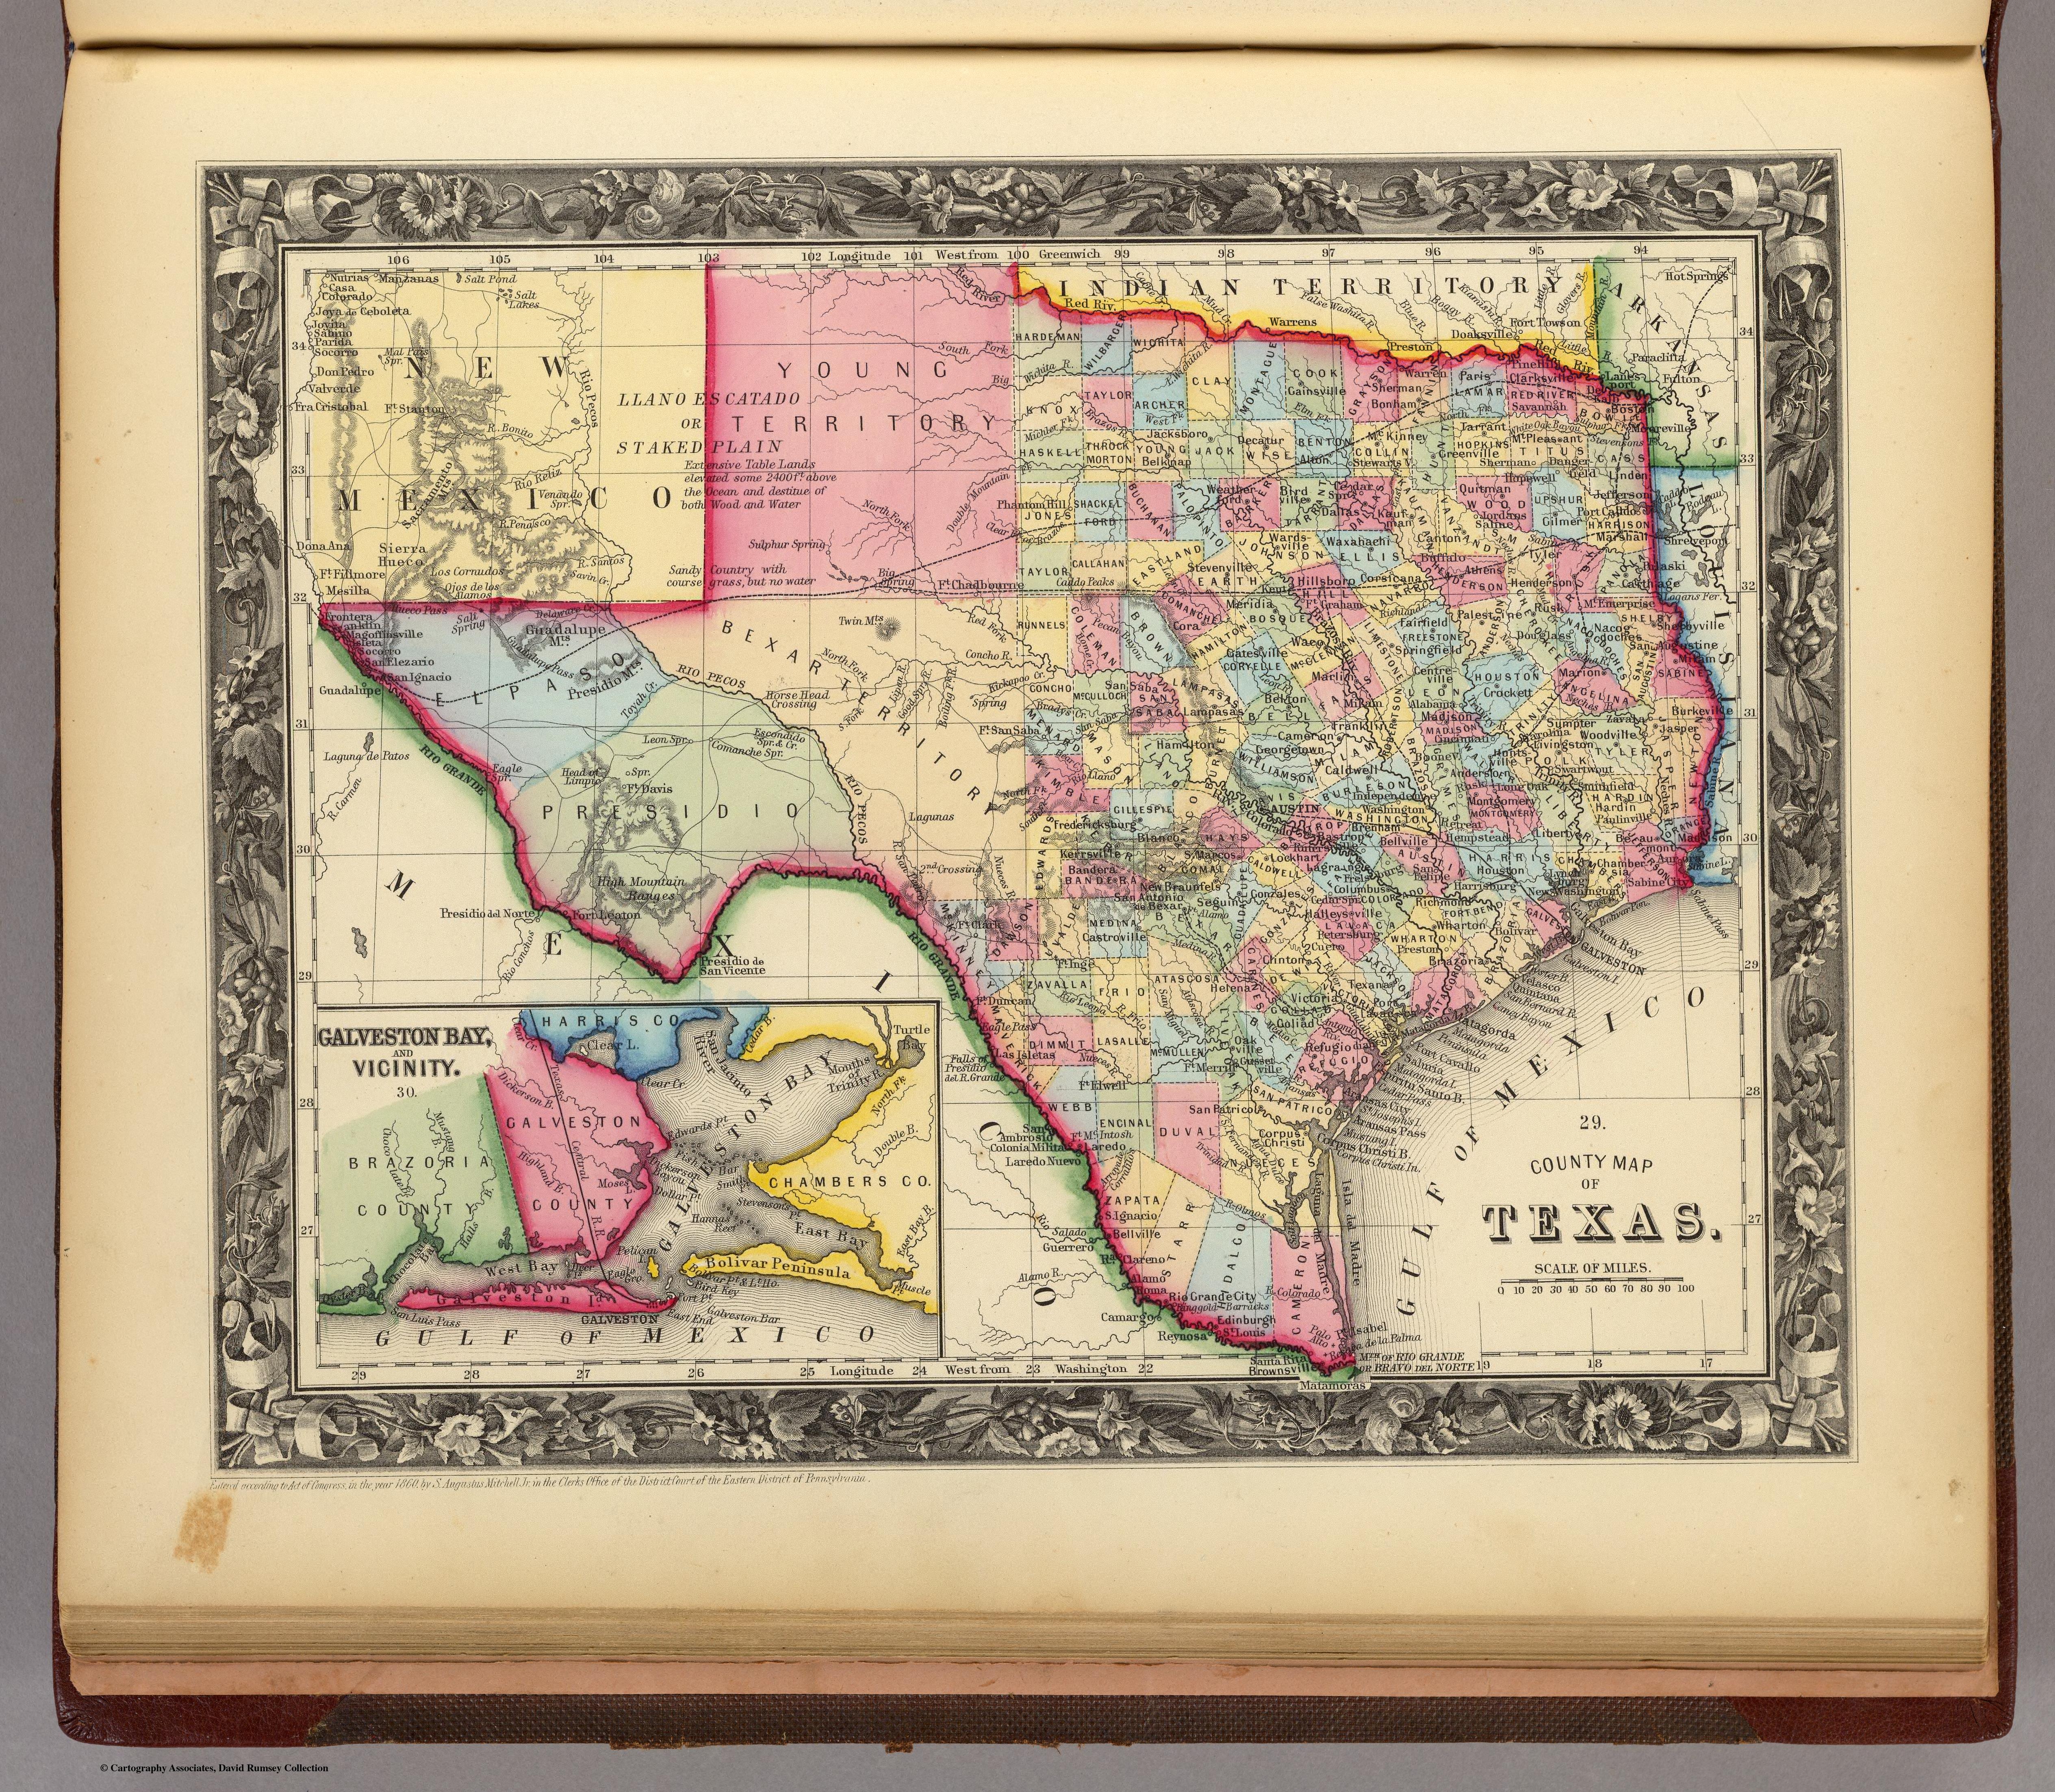 Rumsey Map of Texas Counties, 1860